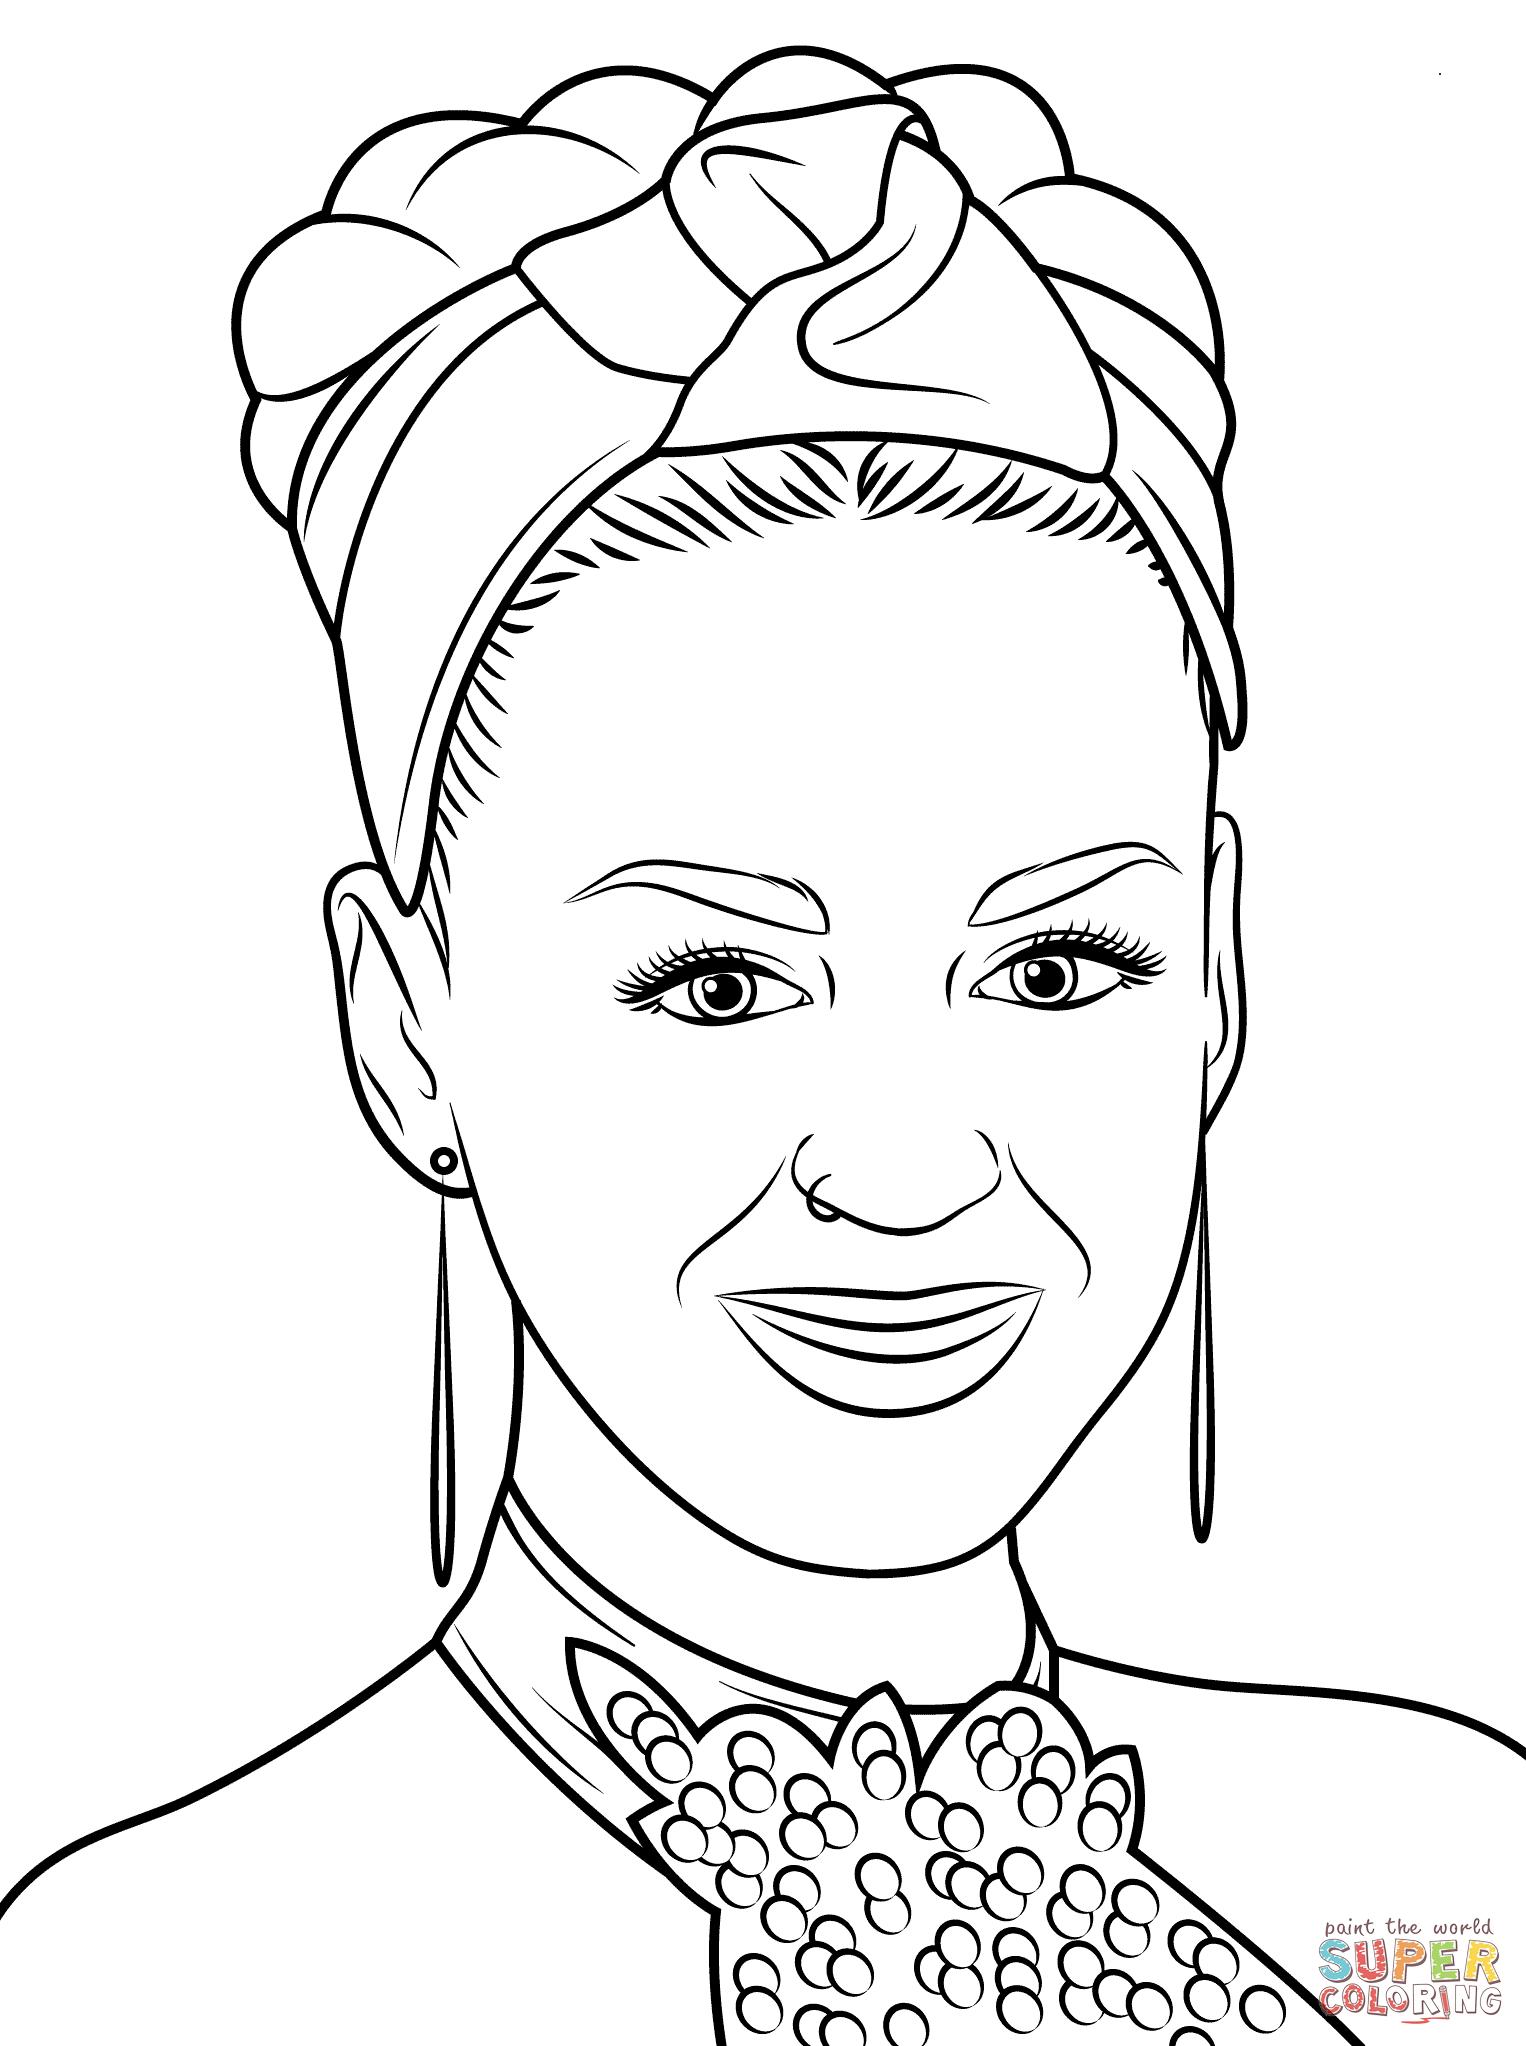 Adele Coloring Pages at GetColorings.com | Free printable colorings